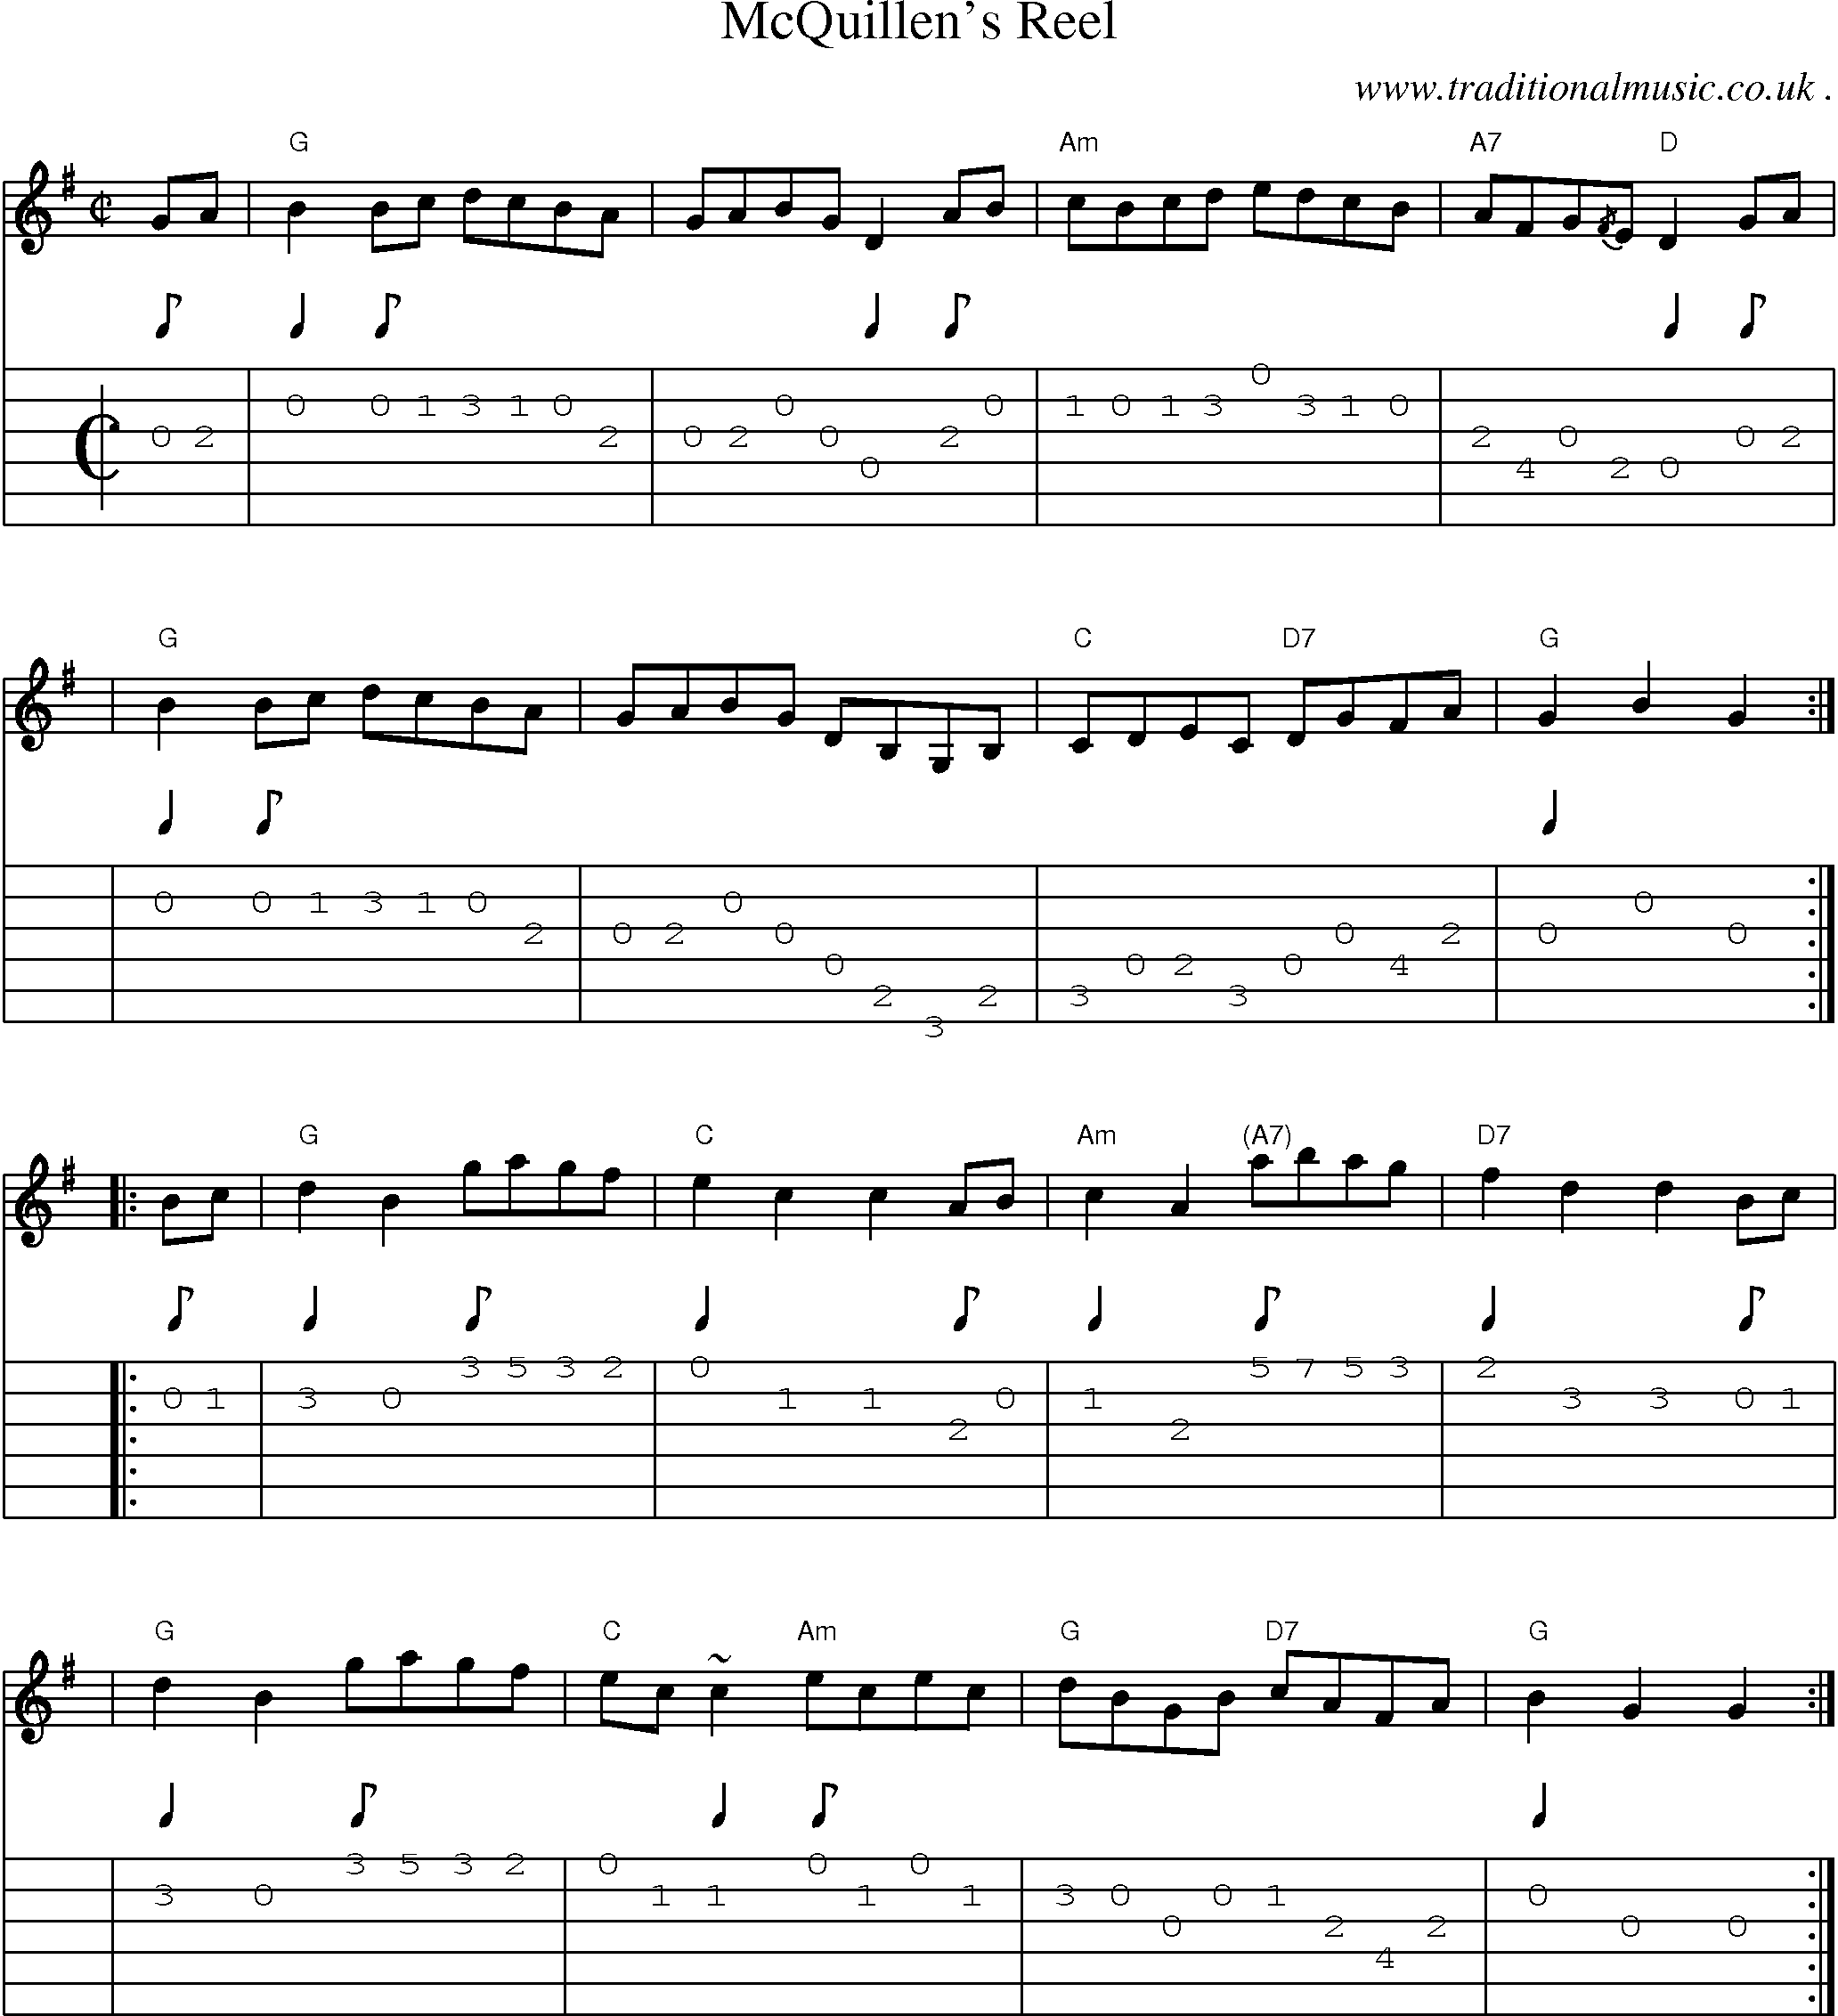 Sheet-music  score, Chords and Guitar Tabs for Mcquillens Reel